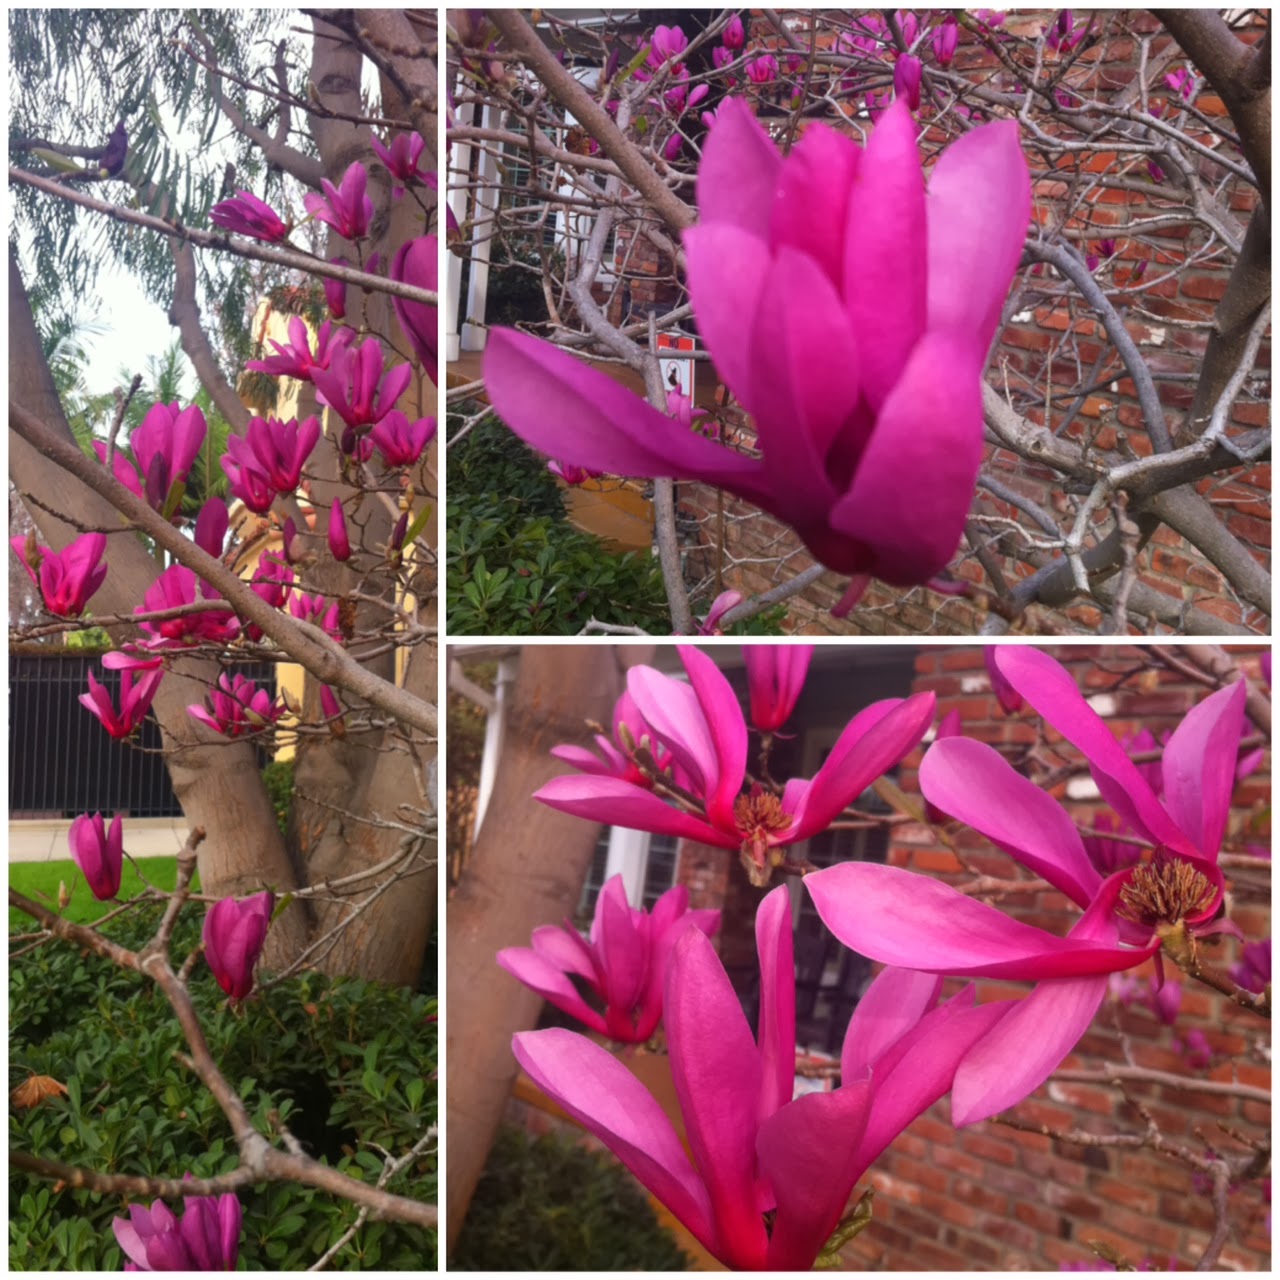 The lovely tulip magnolia tree at Don and David's house.